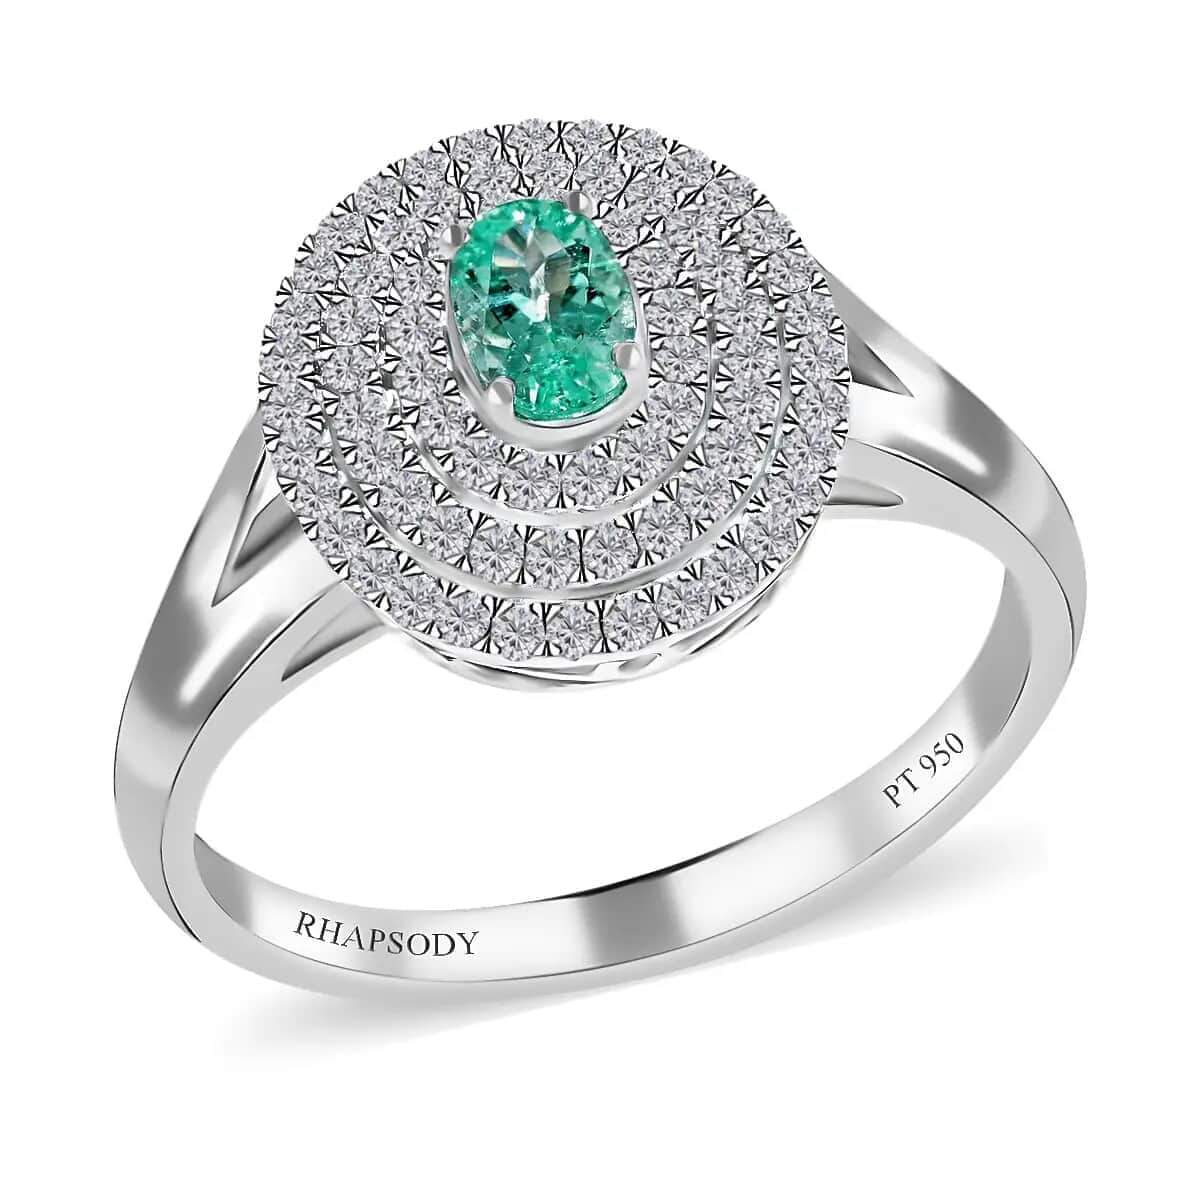 Certified Rhapsody 950 Platinum AAAA Paraiba Tourmaline Ring, Diamond Cocktail Ring, Wedding Rings For Women 1.00 ctw (Size 7) image number 0